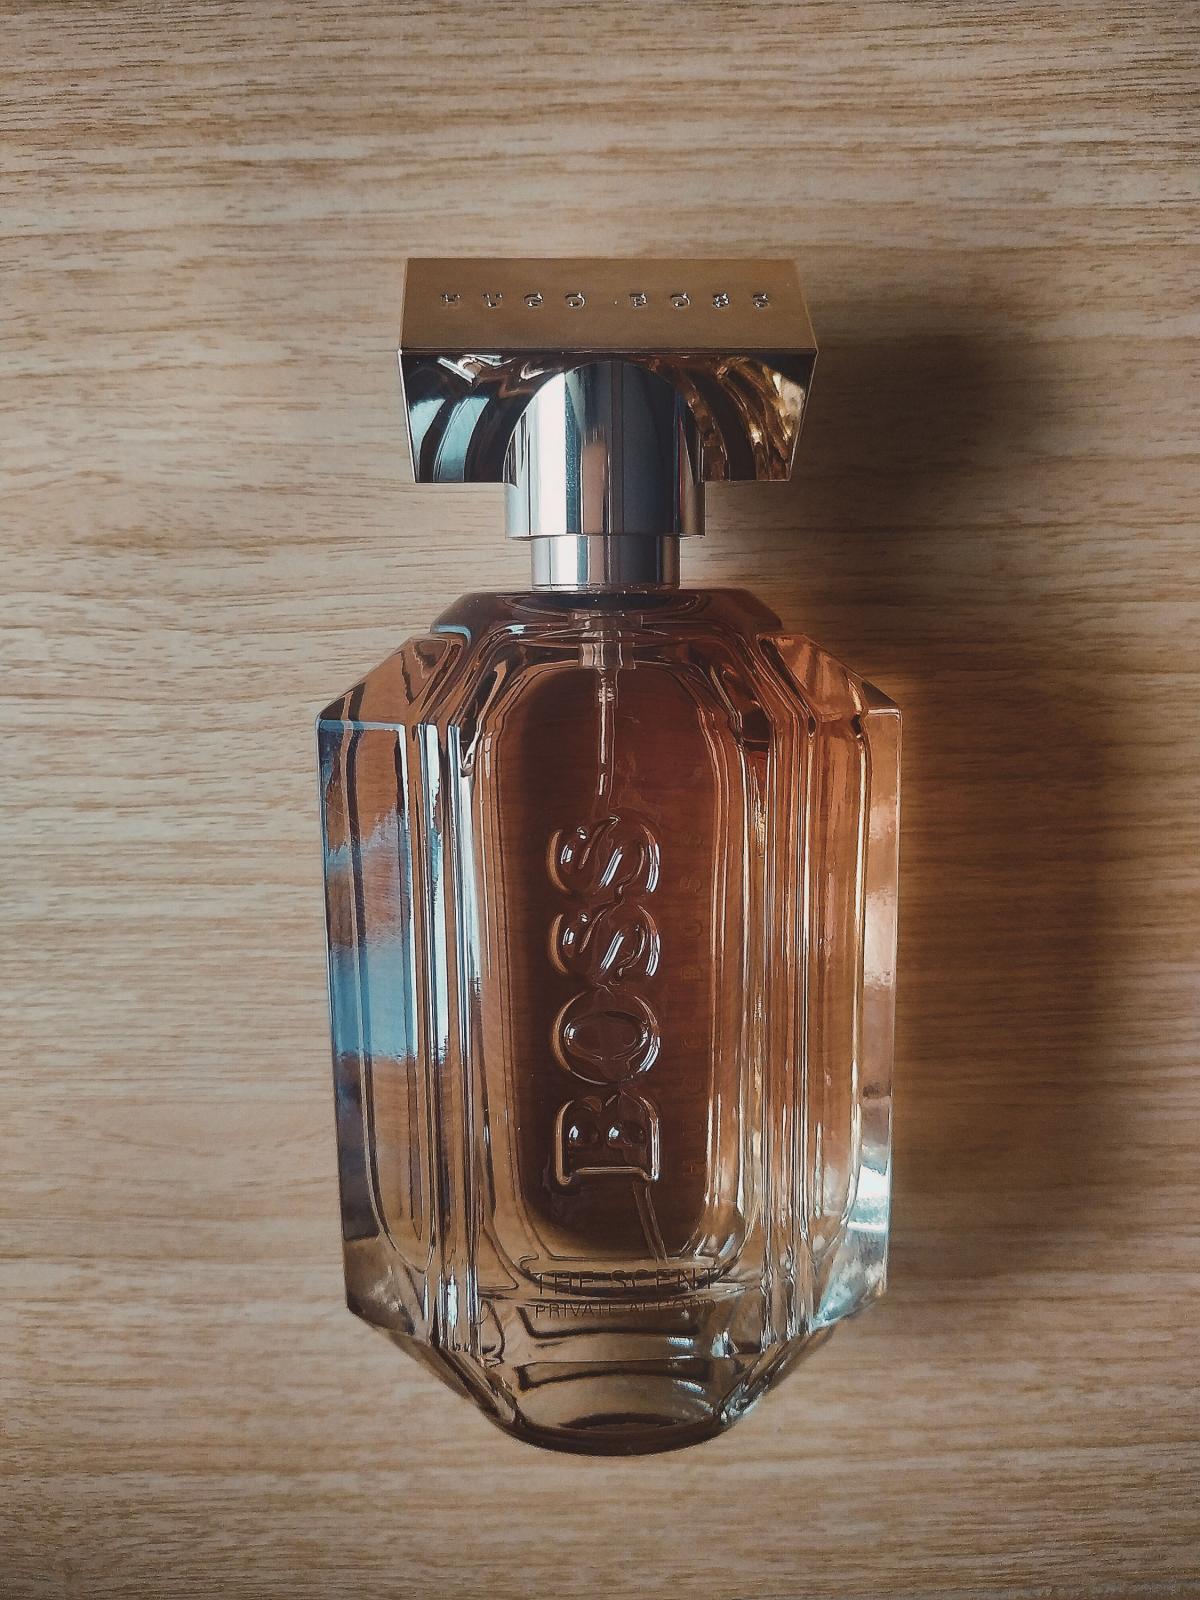 Boss for her парфюмерная вода. Хьюго босс приват Аккорд. Boss the Scent private Accord for her. Босс приват Аккорд женские. Boss private Accord for her купить.